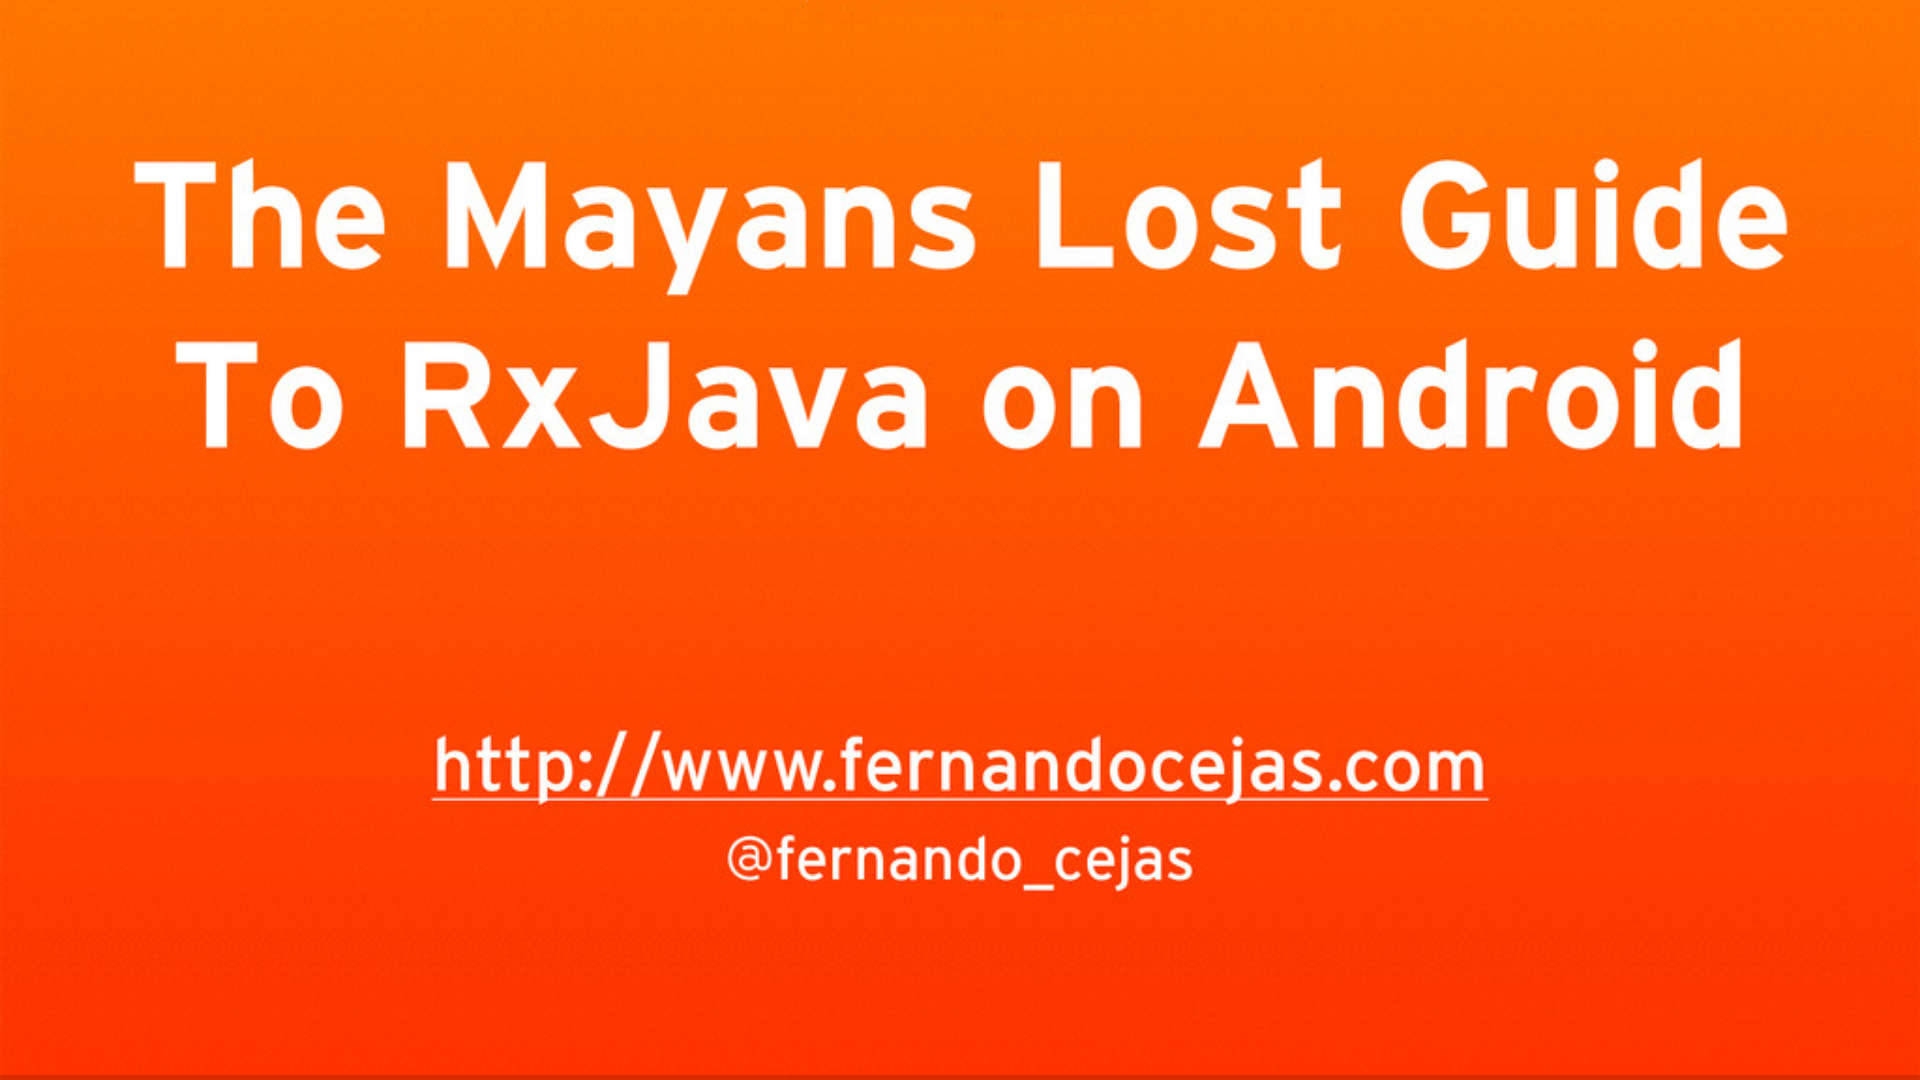 The Mayans Lost Guide to RxJava on Android. 